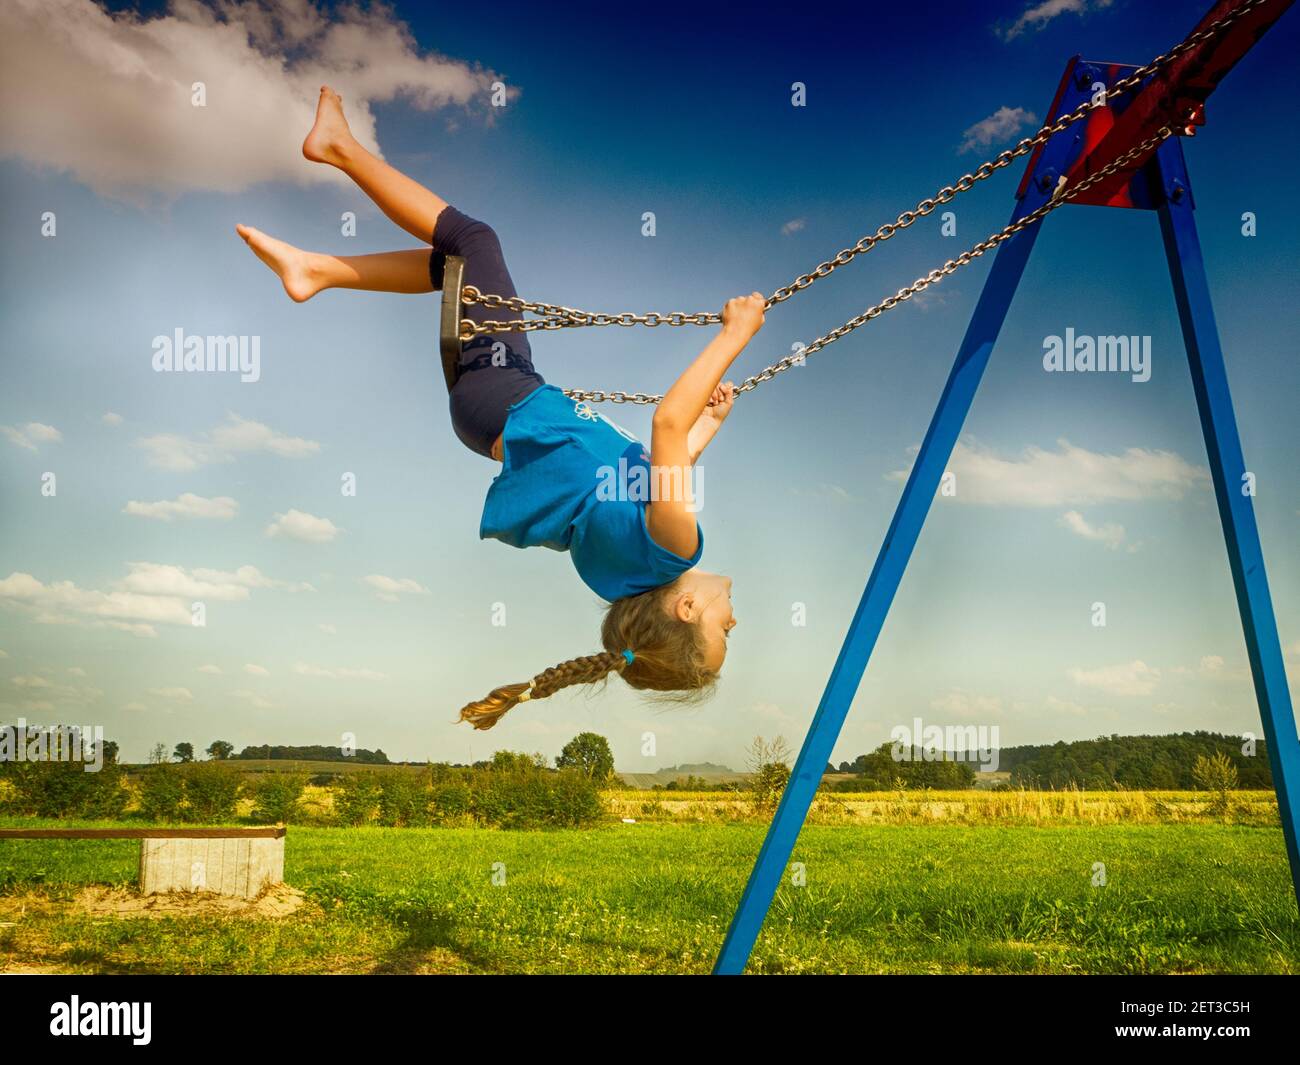 Upside down girl swinging on a swing in a playground, Poland Stock Photo